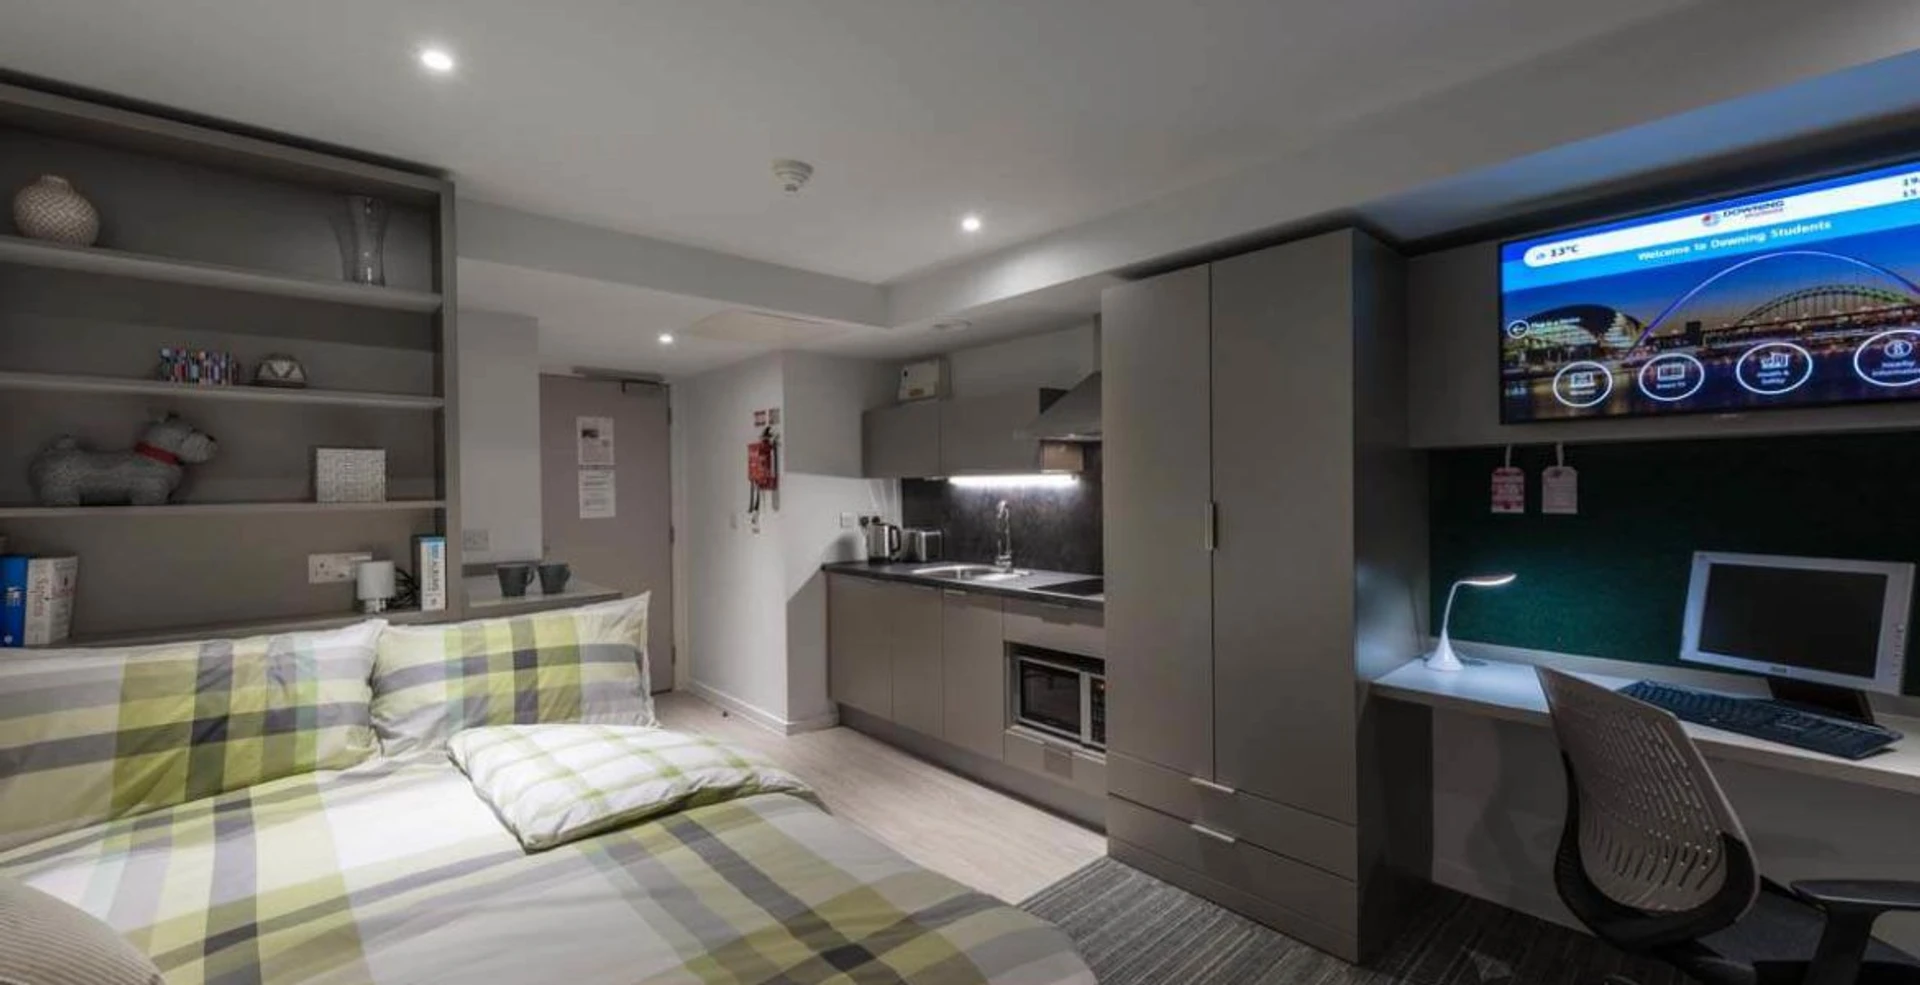 Renting rooms by the month in newcastle-upon-tyne